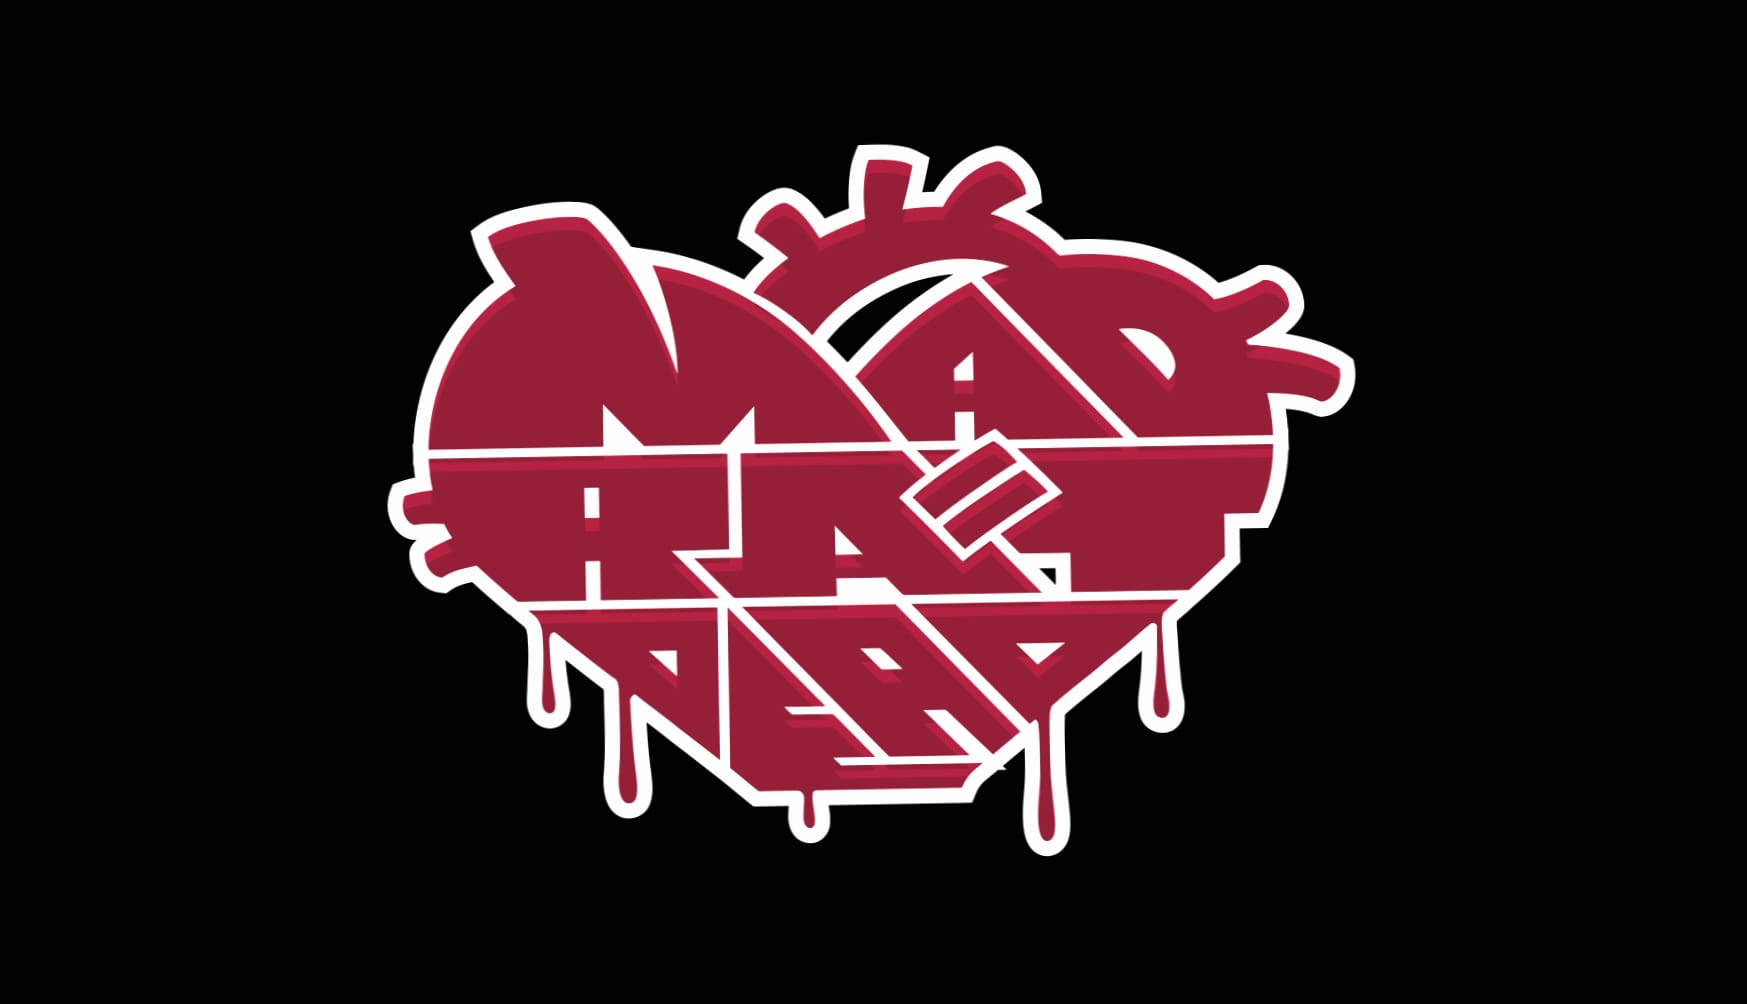 MAD RAT DEAD wallpapers HD quality